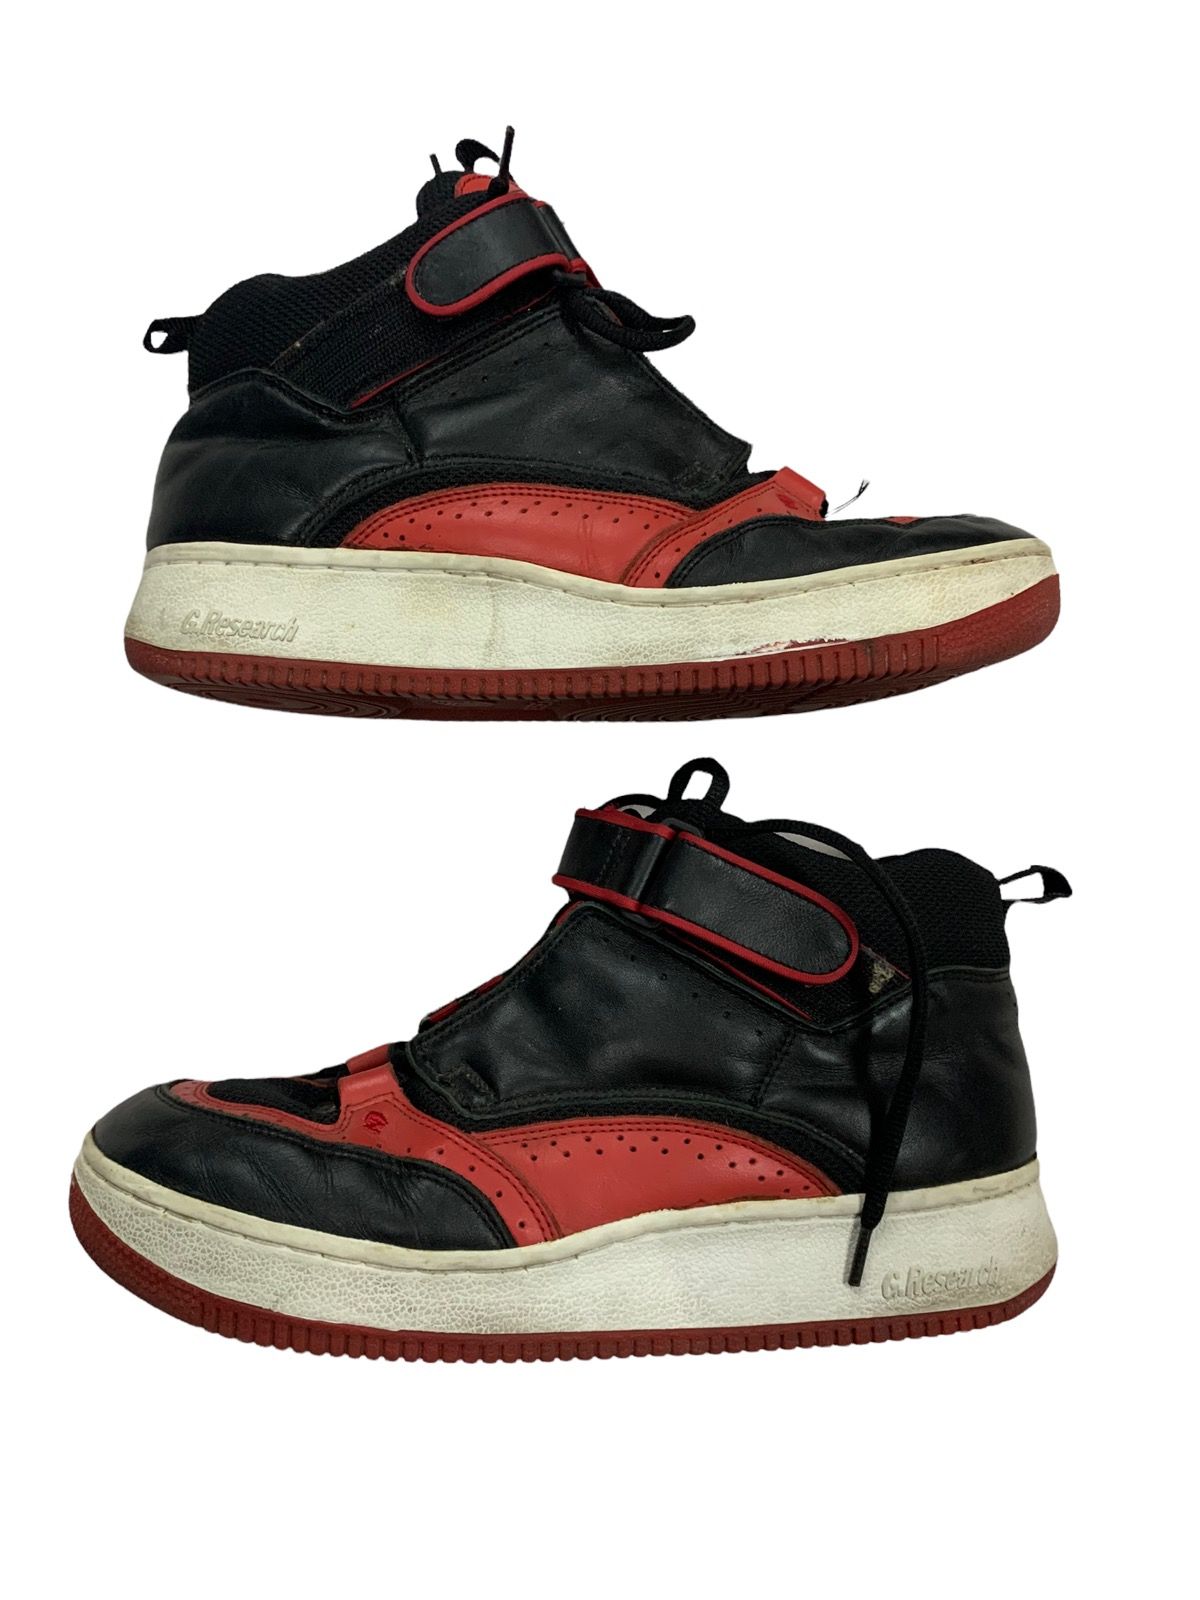 🔥RARE VTG GENERAL RESEARCH MID TOP SNEAKERS - 1